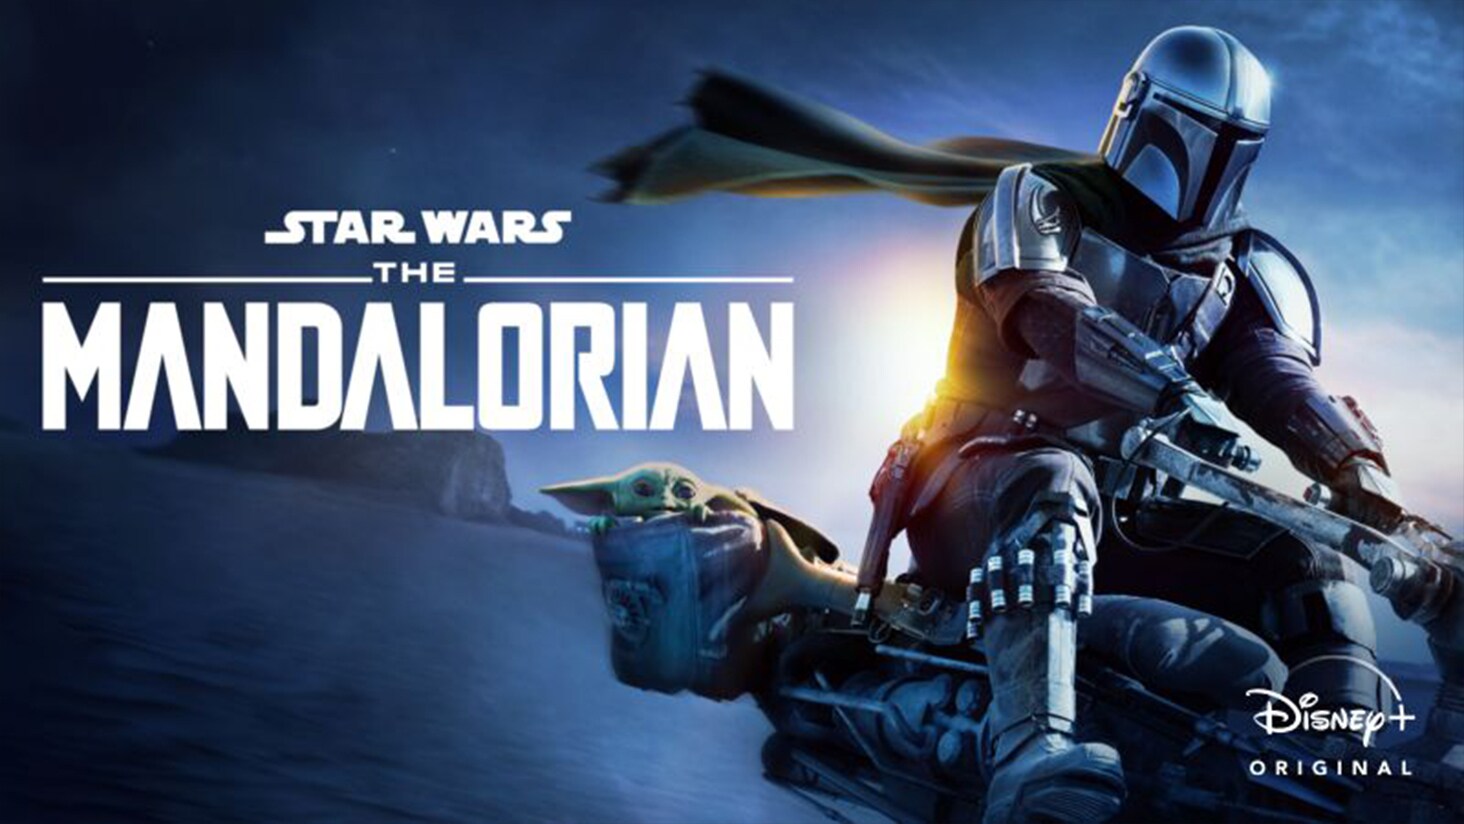 An image featuring Pedro Pascal bounty hunter Din Djarin on a speeder.